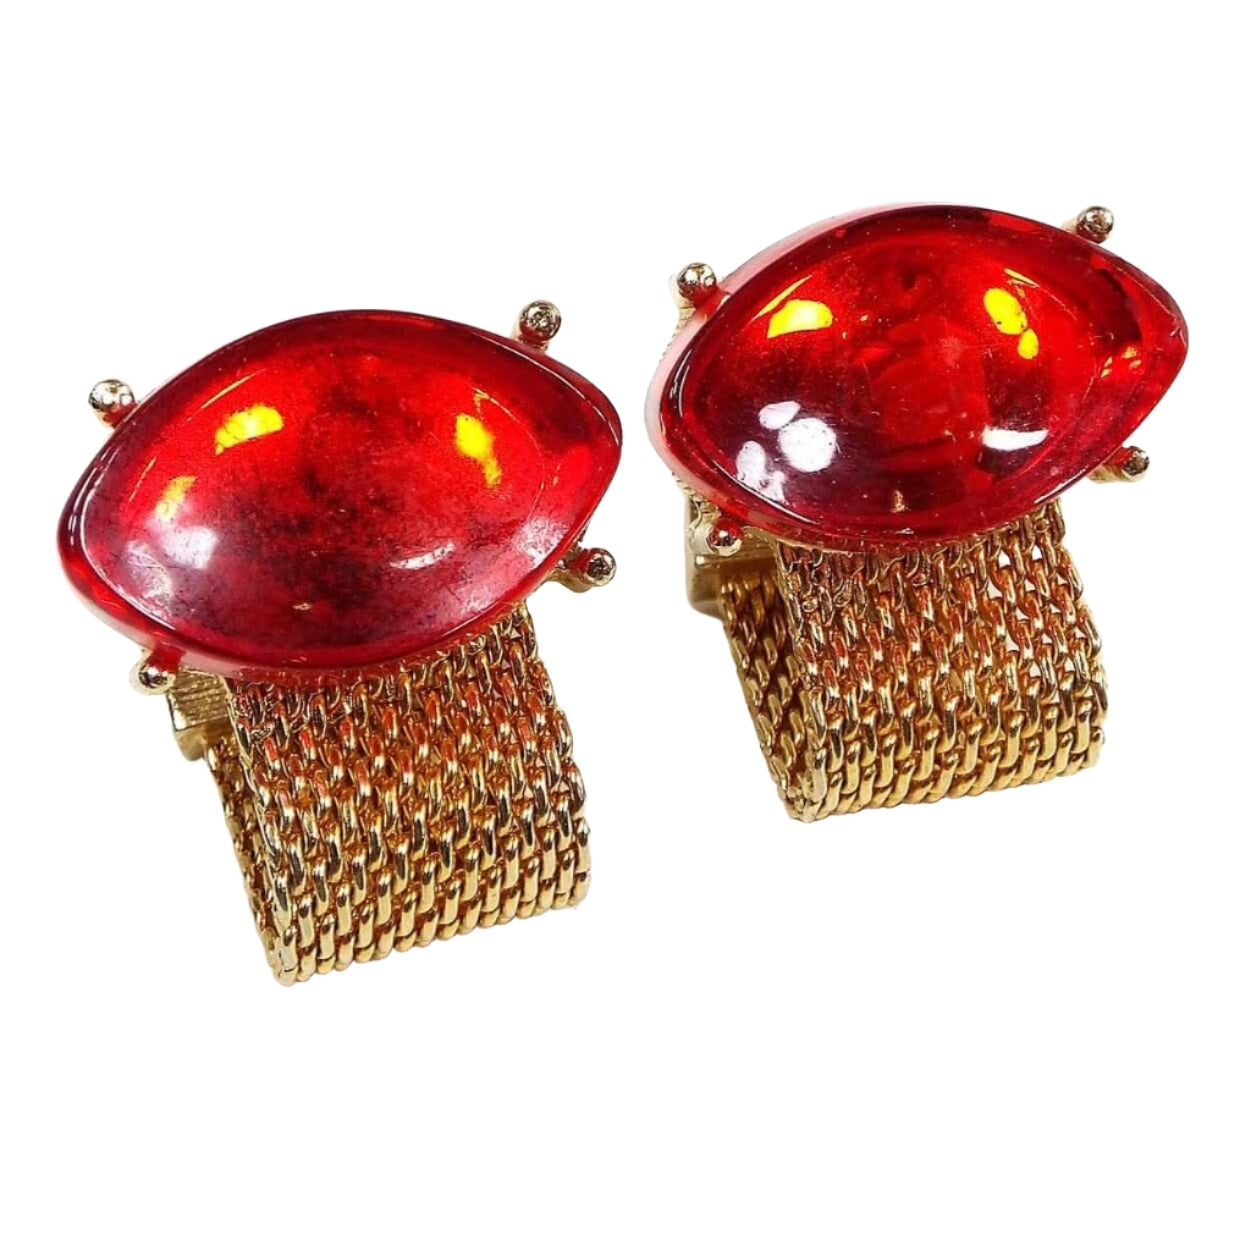 Front view of the Mid Century vintage glass wrap around mesh cufflinks. The metal is gold tone in color. There are large oval red glass cabs at the top and metal mesh straps on the bottom that go around to the back.